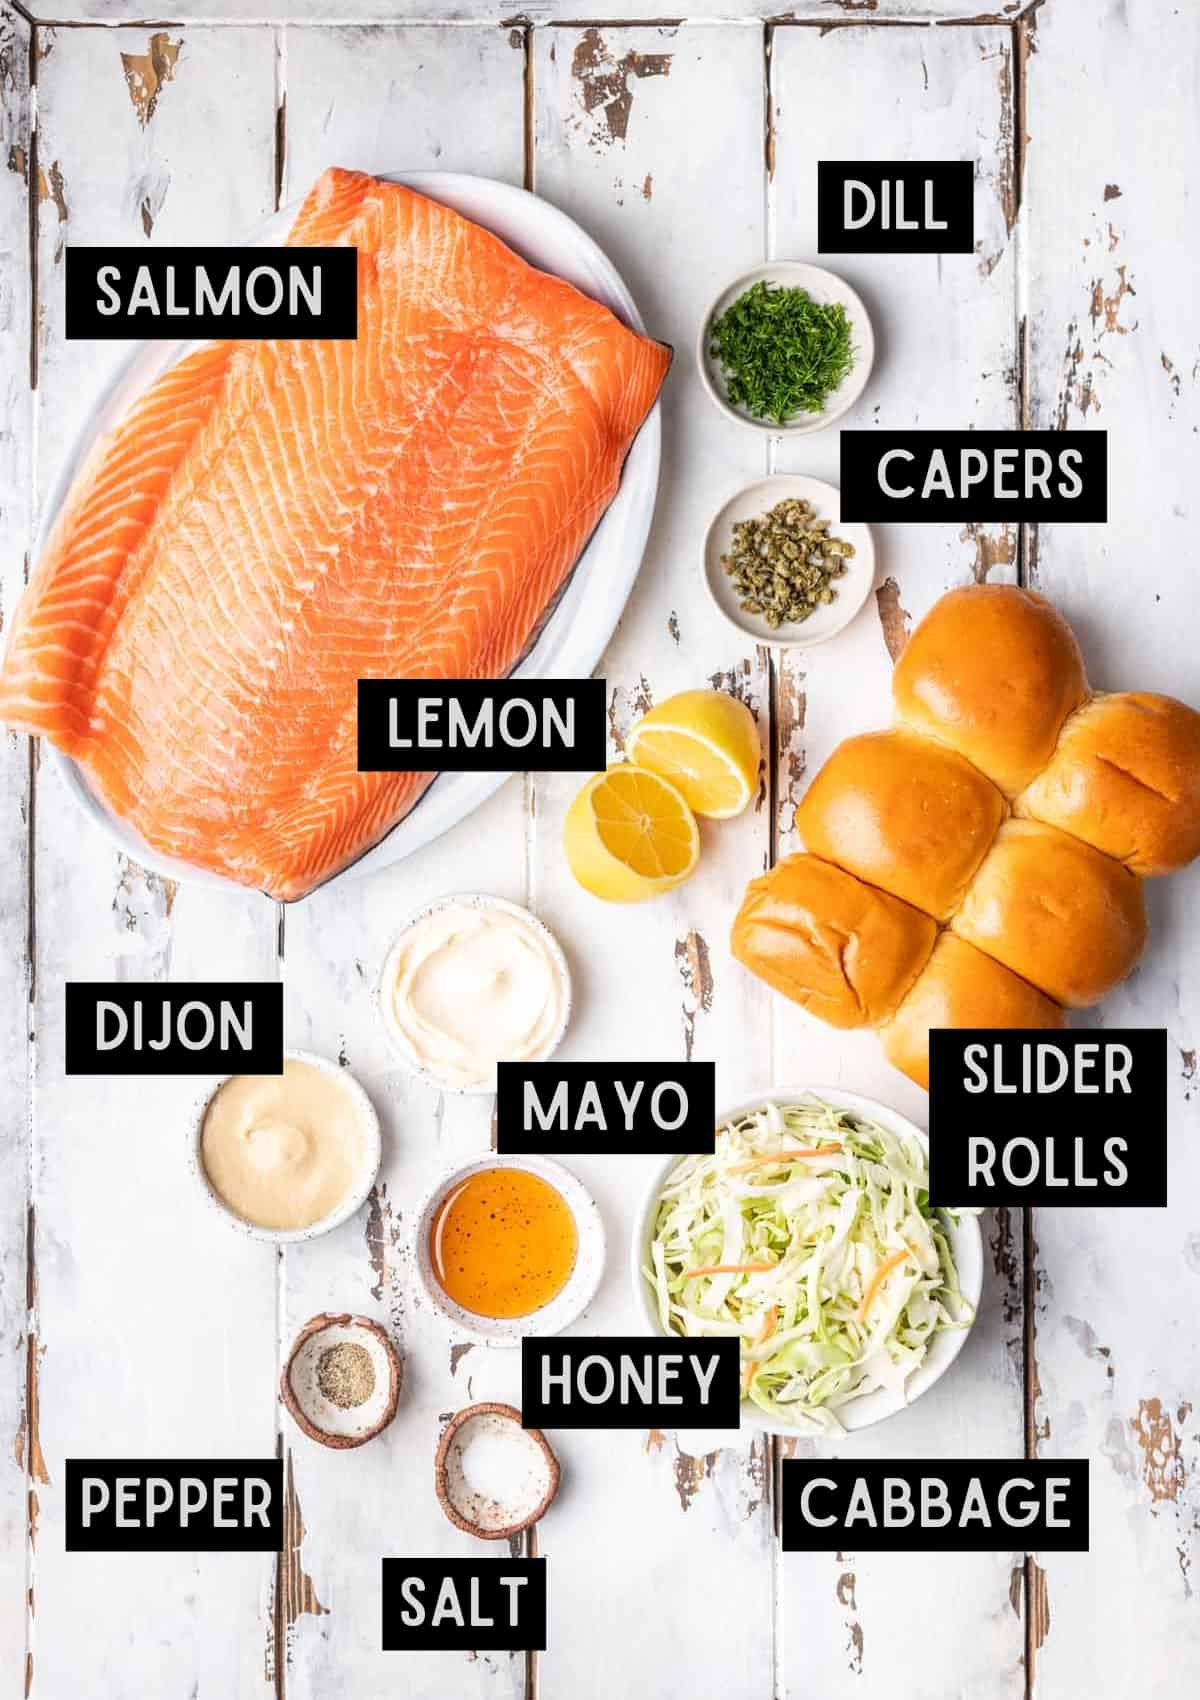 Labelled ingredients for salmon sliders (see recipe for details).